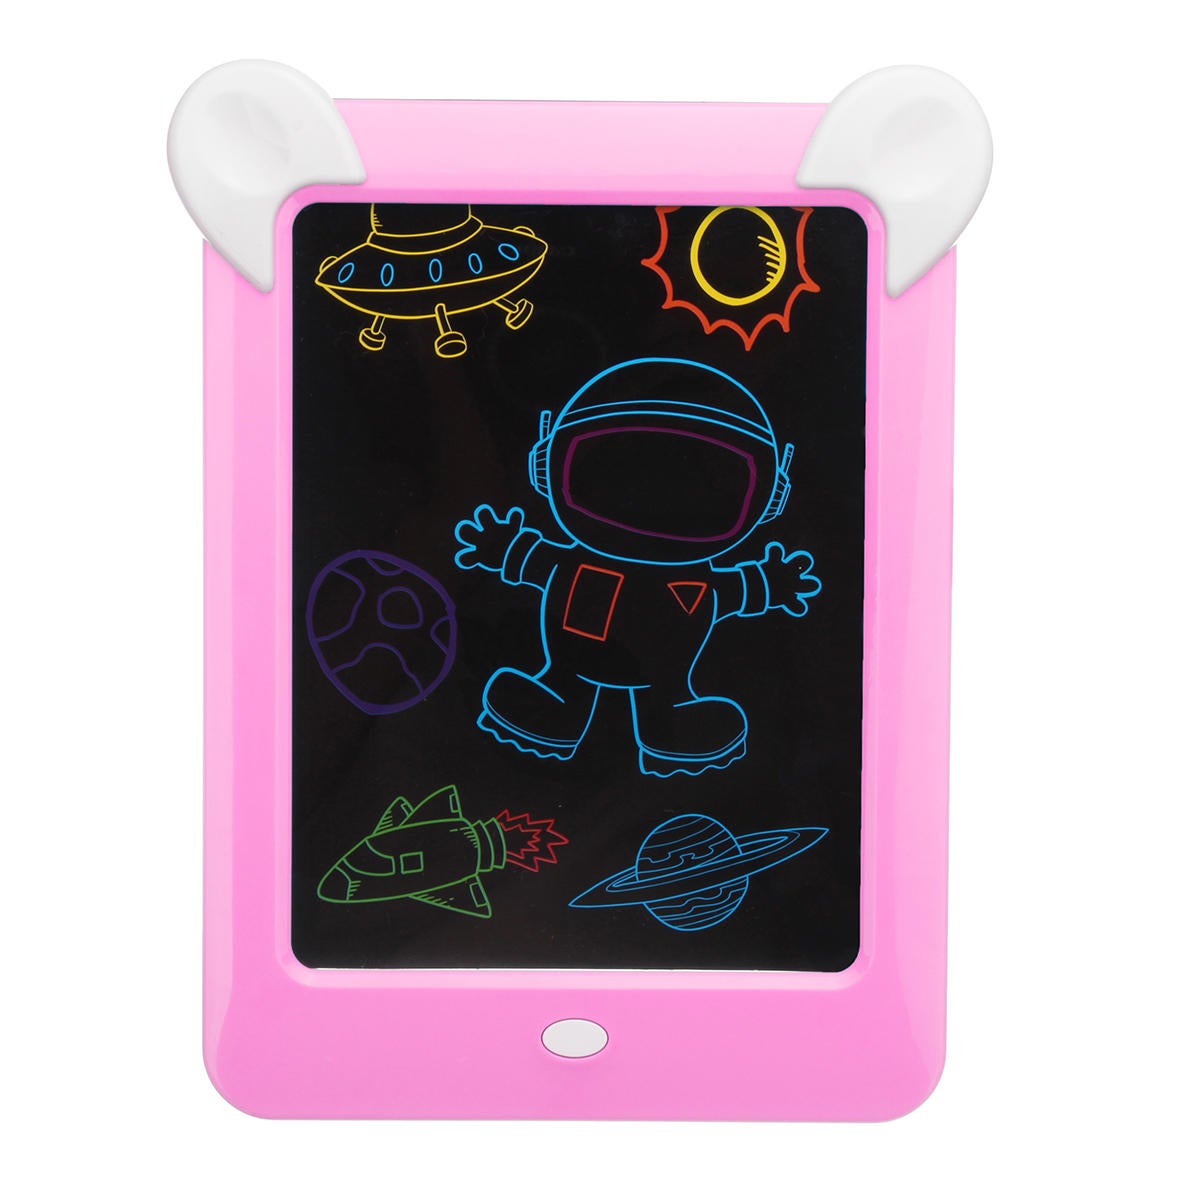 3D Magic Drawing Pad Children'S Brain Development Puzzle Board With Light Pink